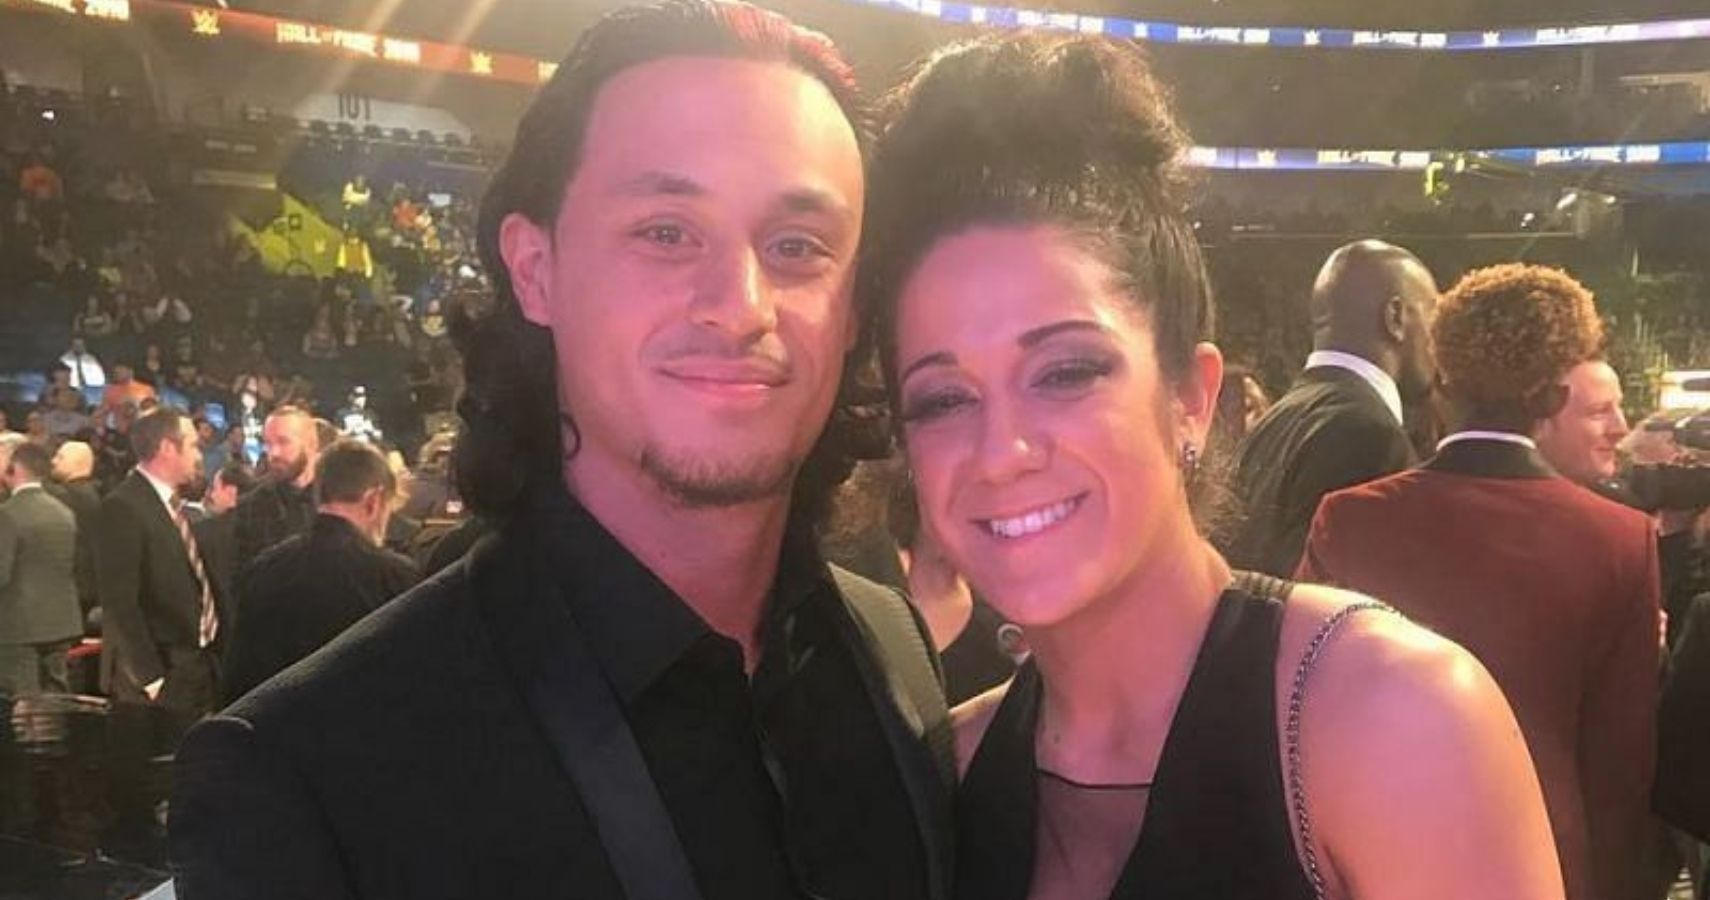 bayley aaron solow wwe engaged boyfriend couple superstars reportedly roster current wrestletalk